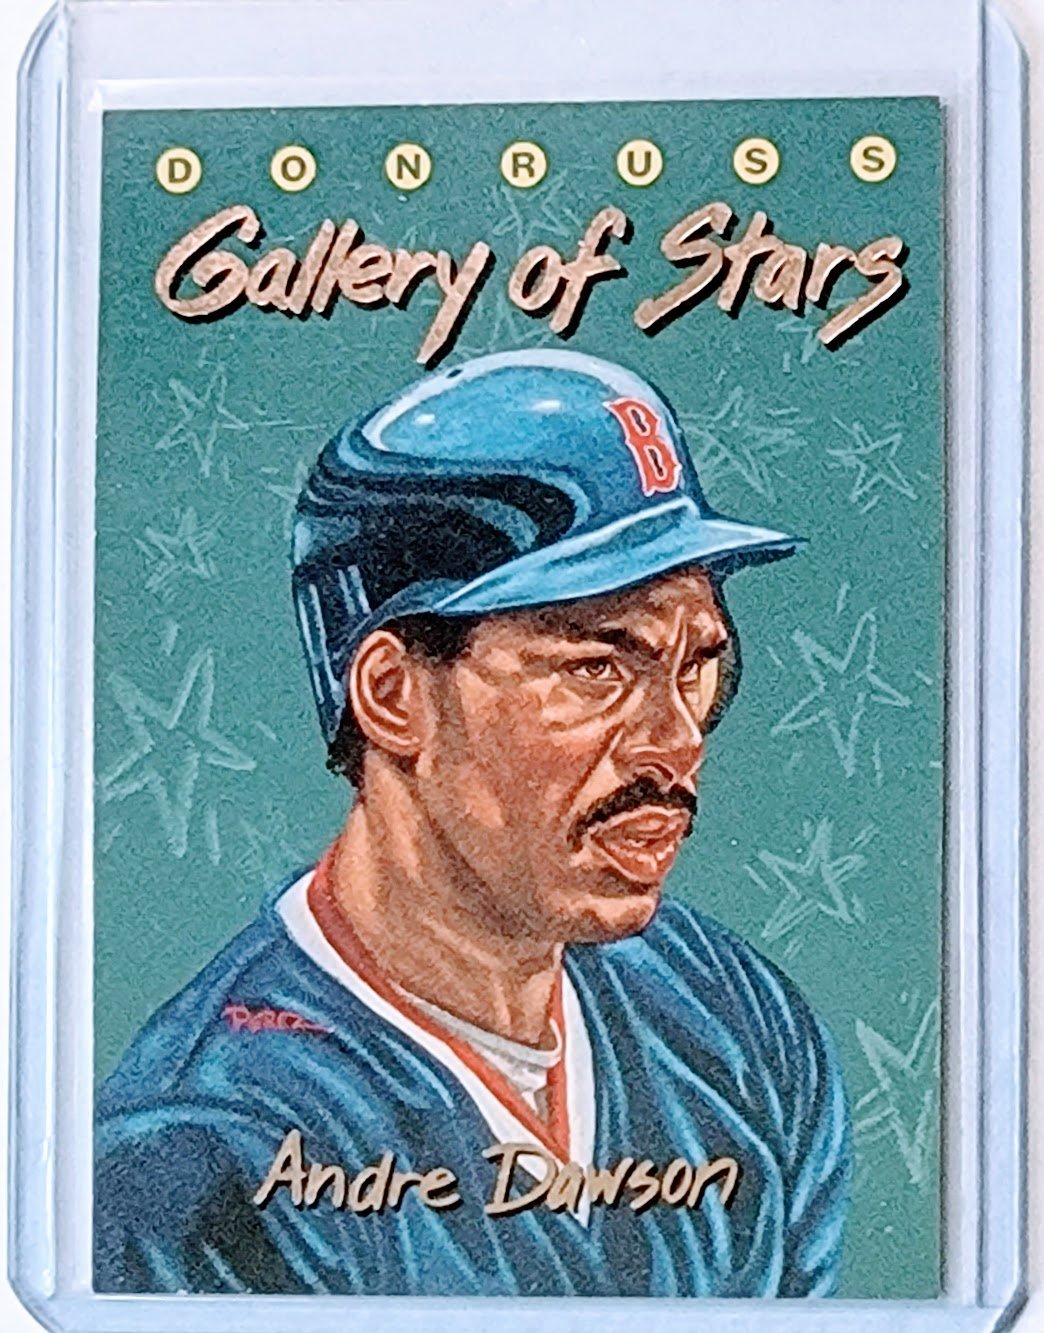 1993 Donruss Gallery of Stars Andre Dawson Baseball Trading Card TPTV simple Xclusive Collectibles   